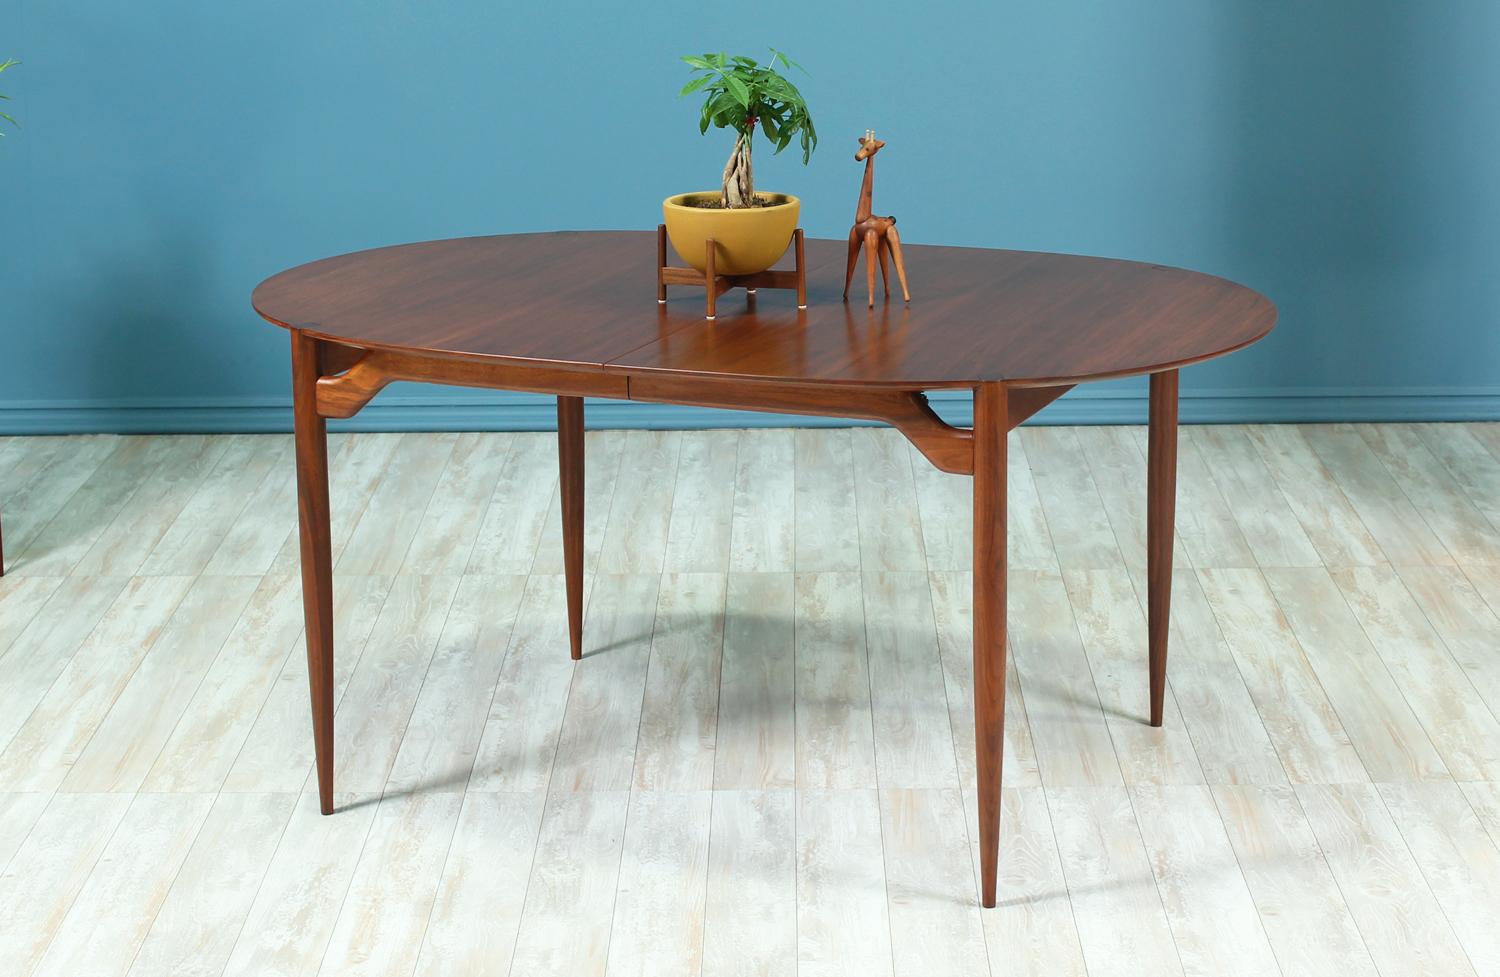 Dining table designed by Greta M. Grossman for Glenn of California in the United States circa 1950’s. This stunning table is made of walnut wood and features four tapered legs with sculpted stretchers that support the top while creating a floating